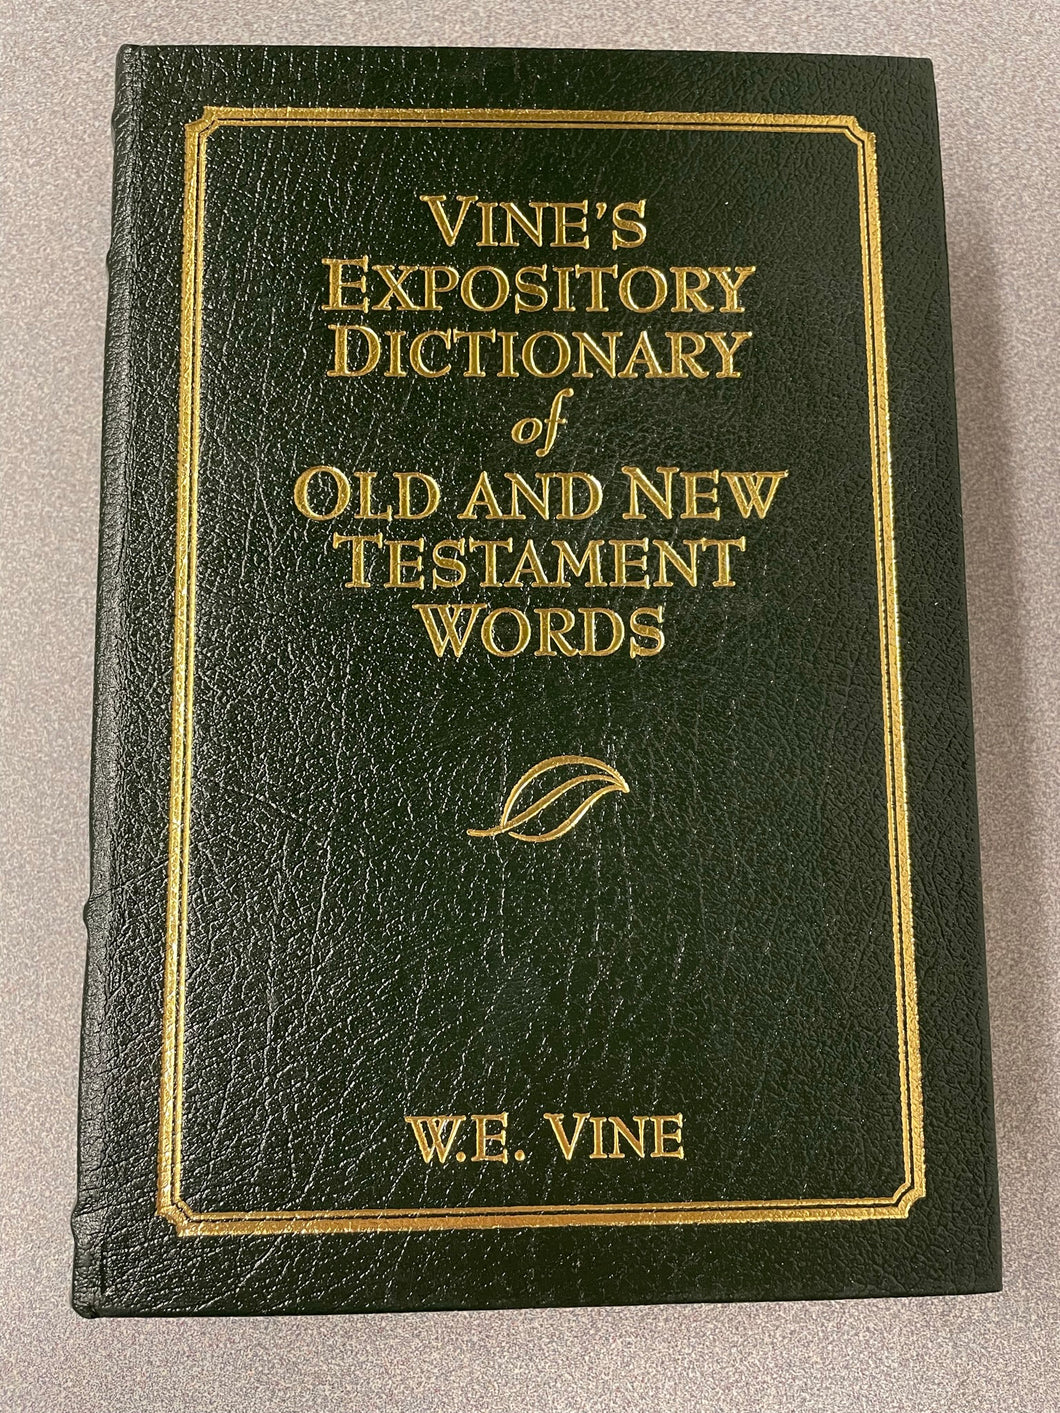 Vine's Expository Dictionary of Old and New Testament Words, Vine, W. E.  [1997] RS 9/23